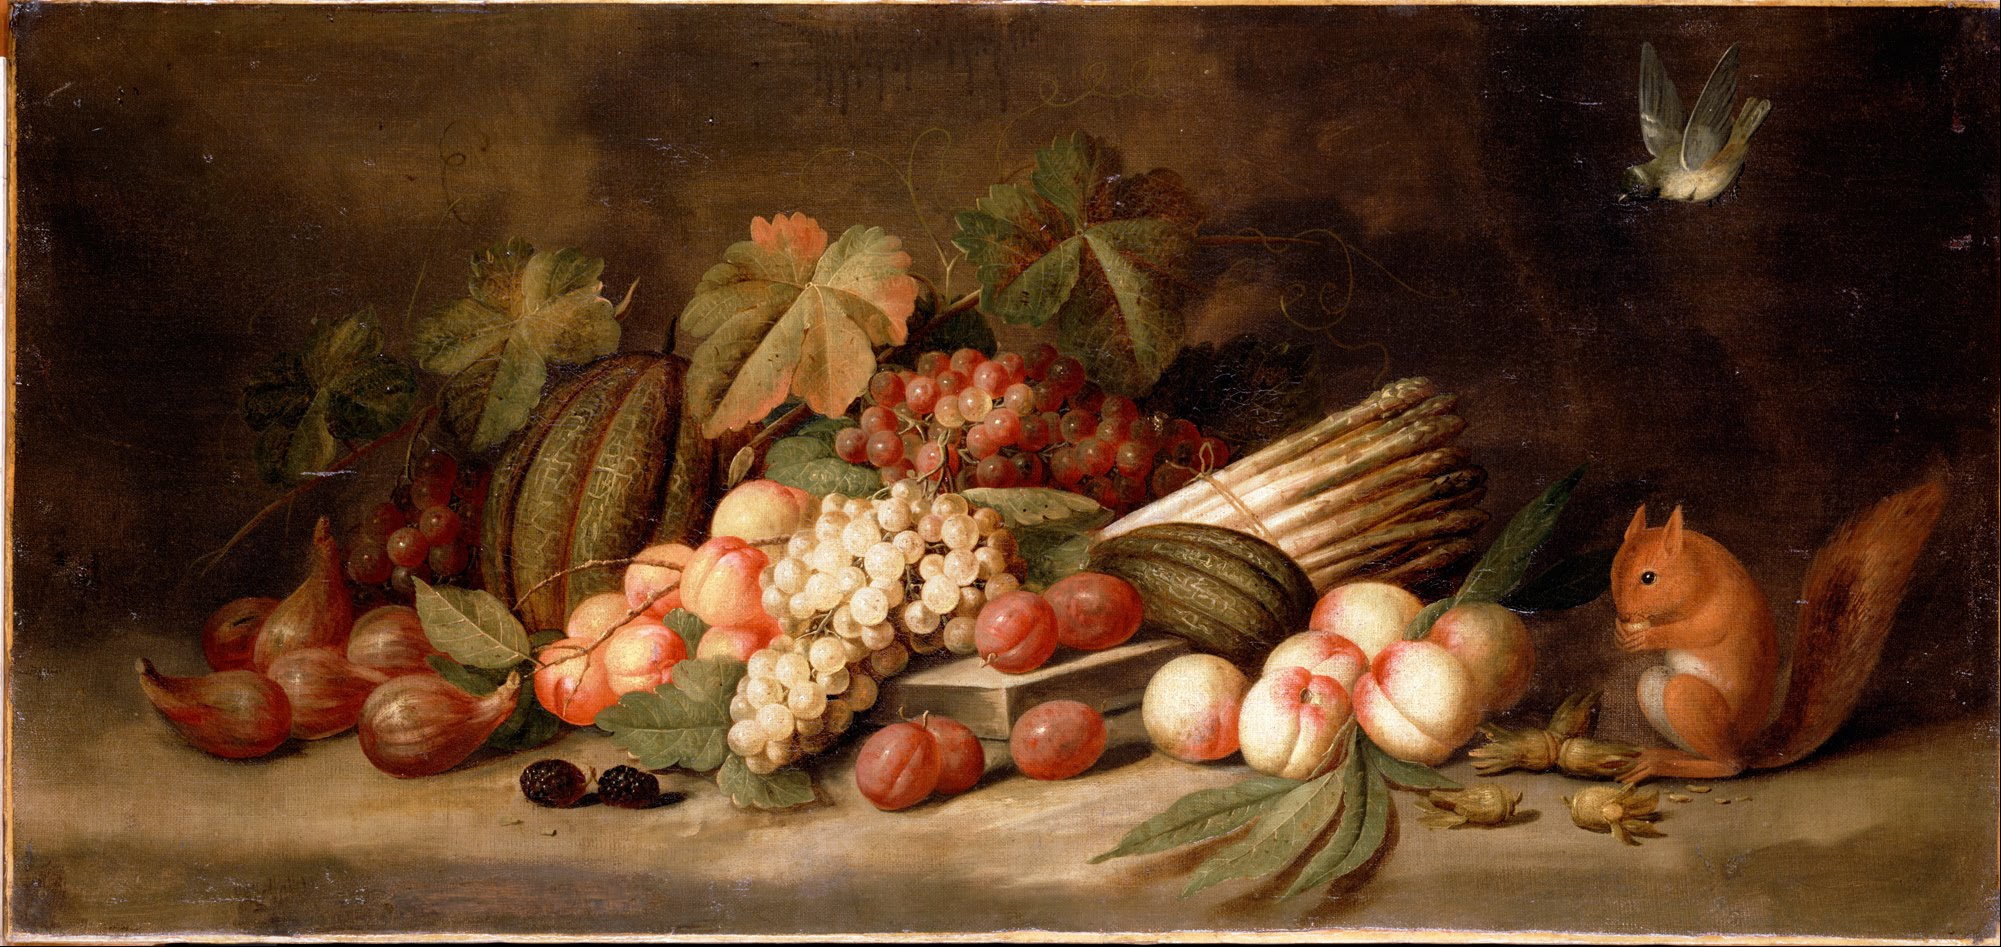 Gillemans, Jan Pauwel the elder - Still Life with Fruit and a Squirrel - Google Art Project